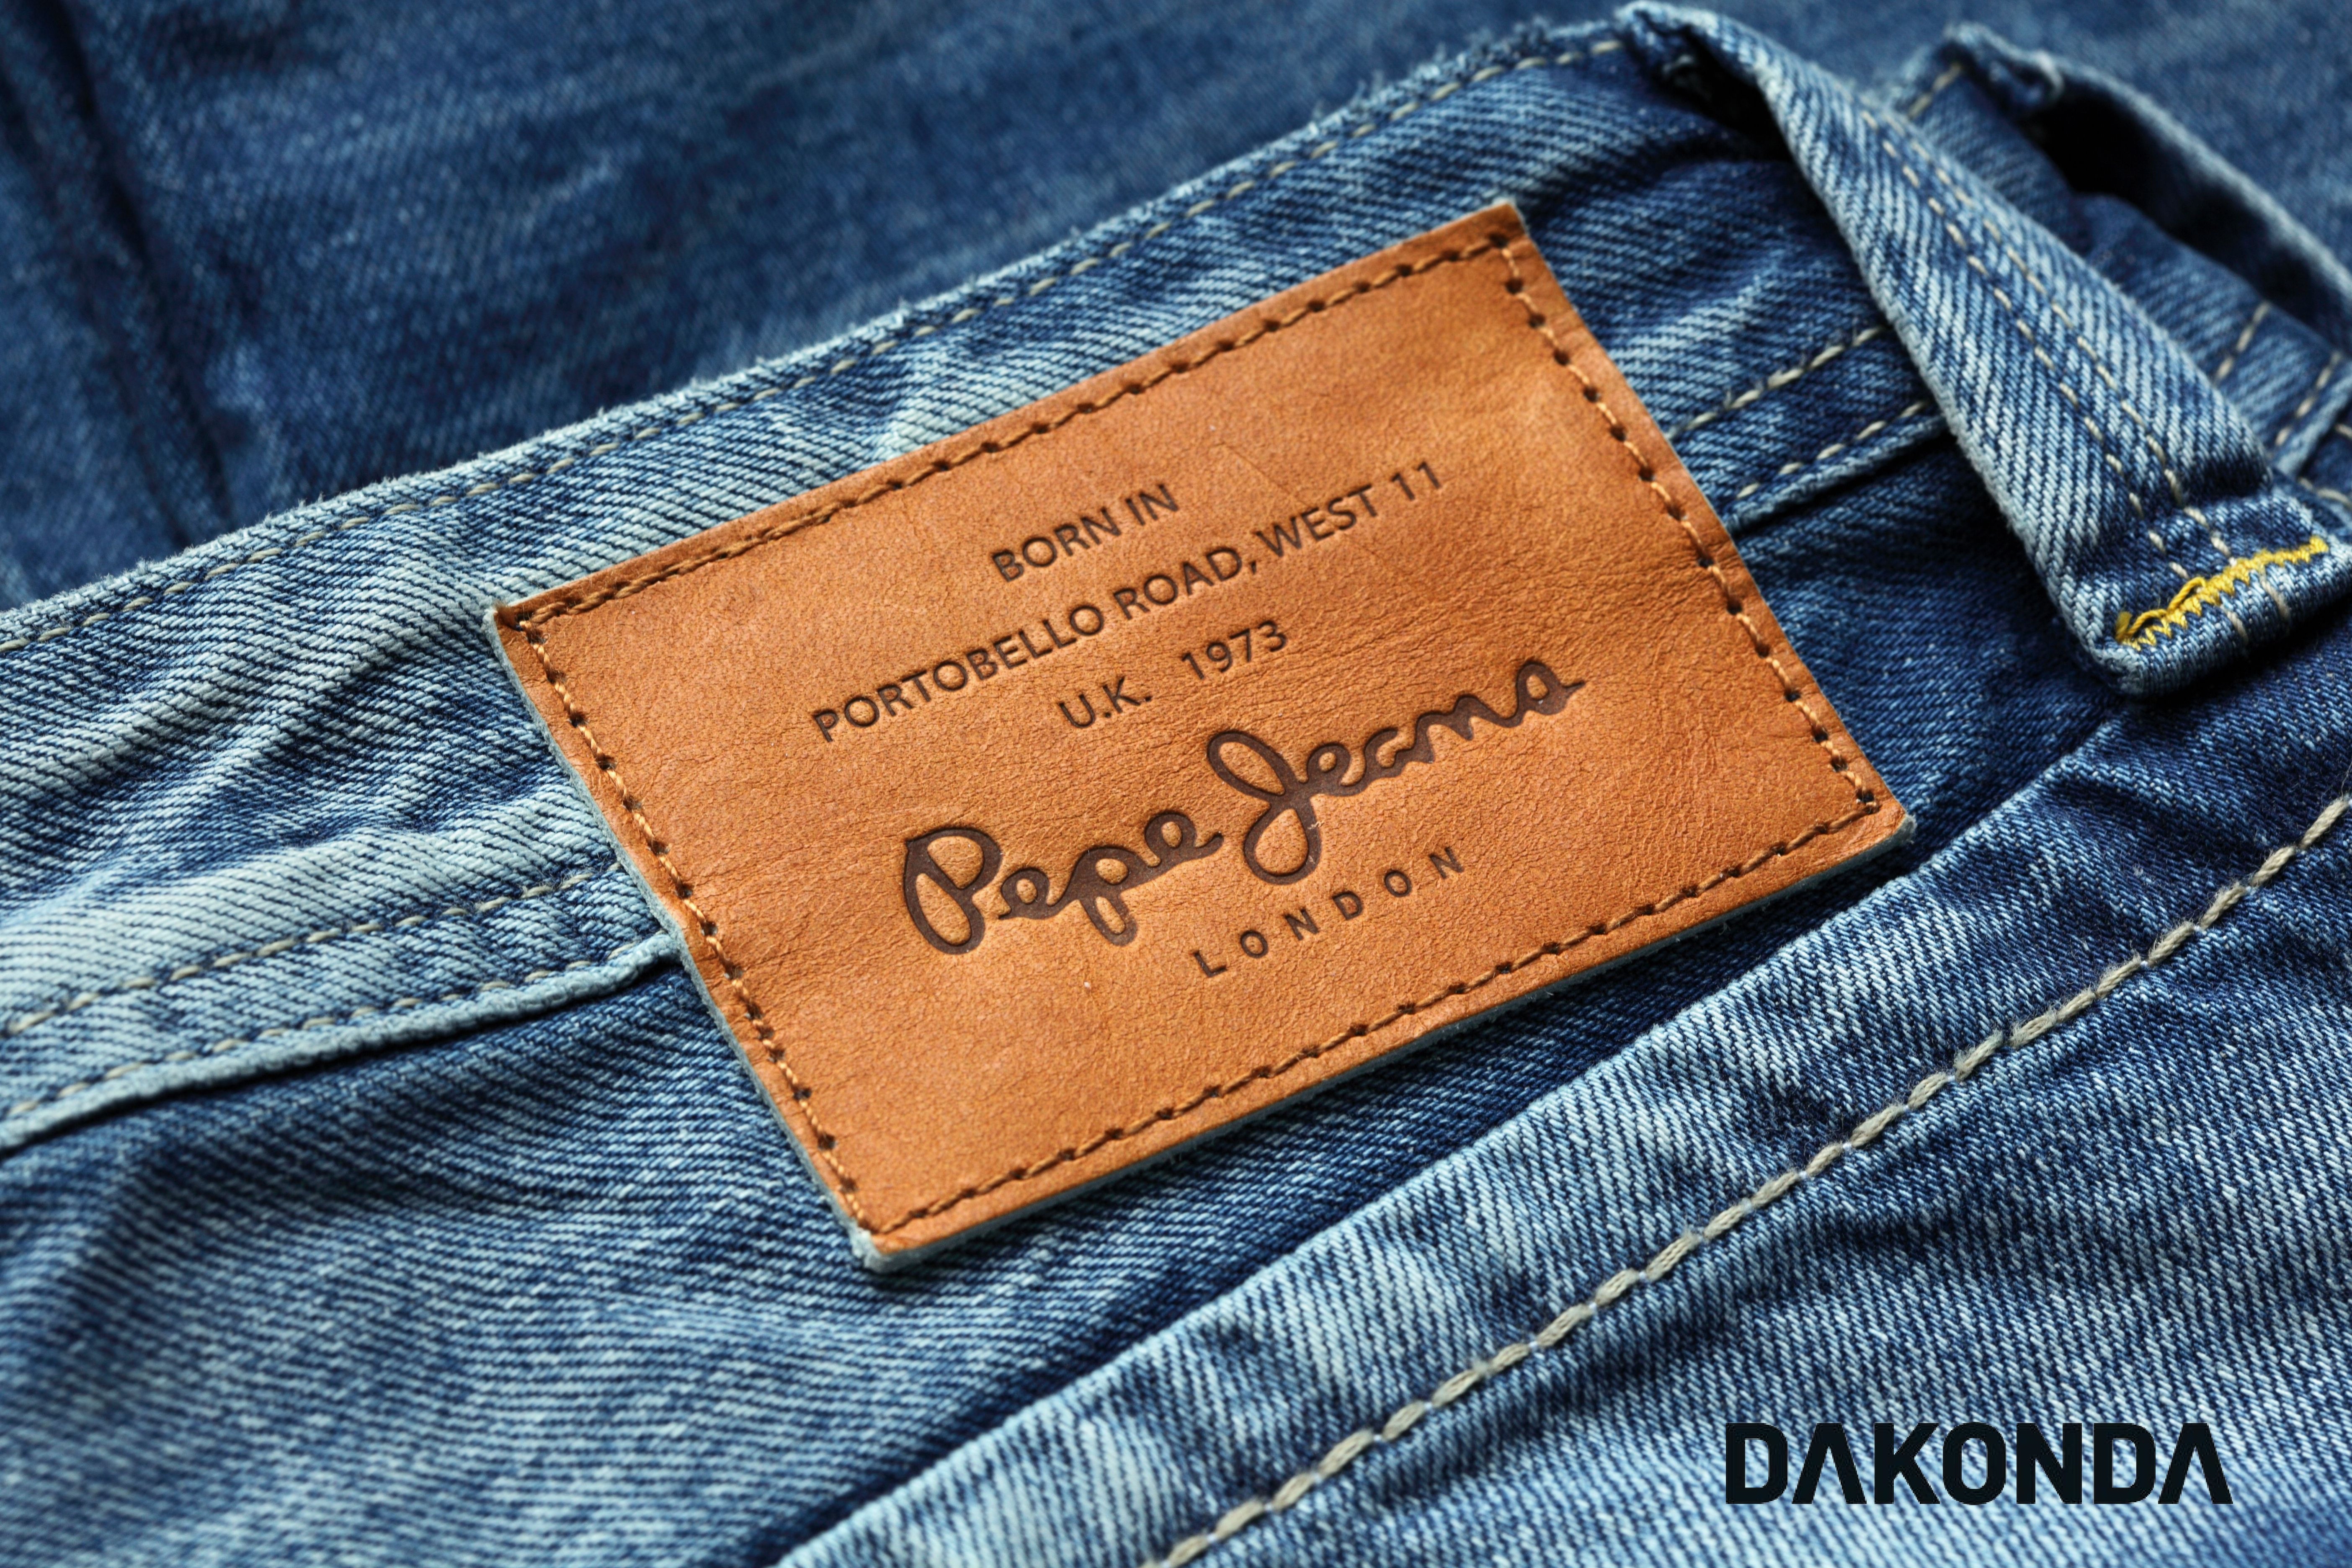 What is the story of Pepe Jeans